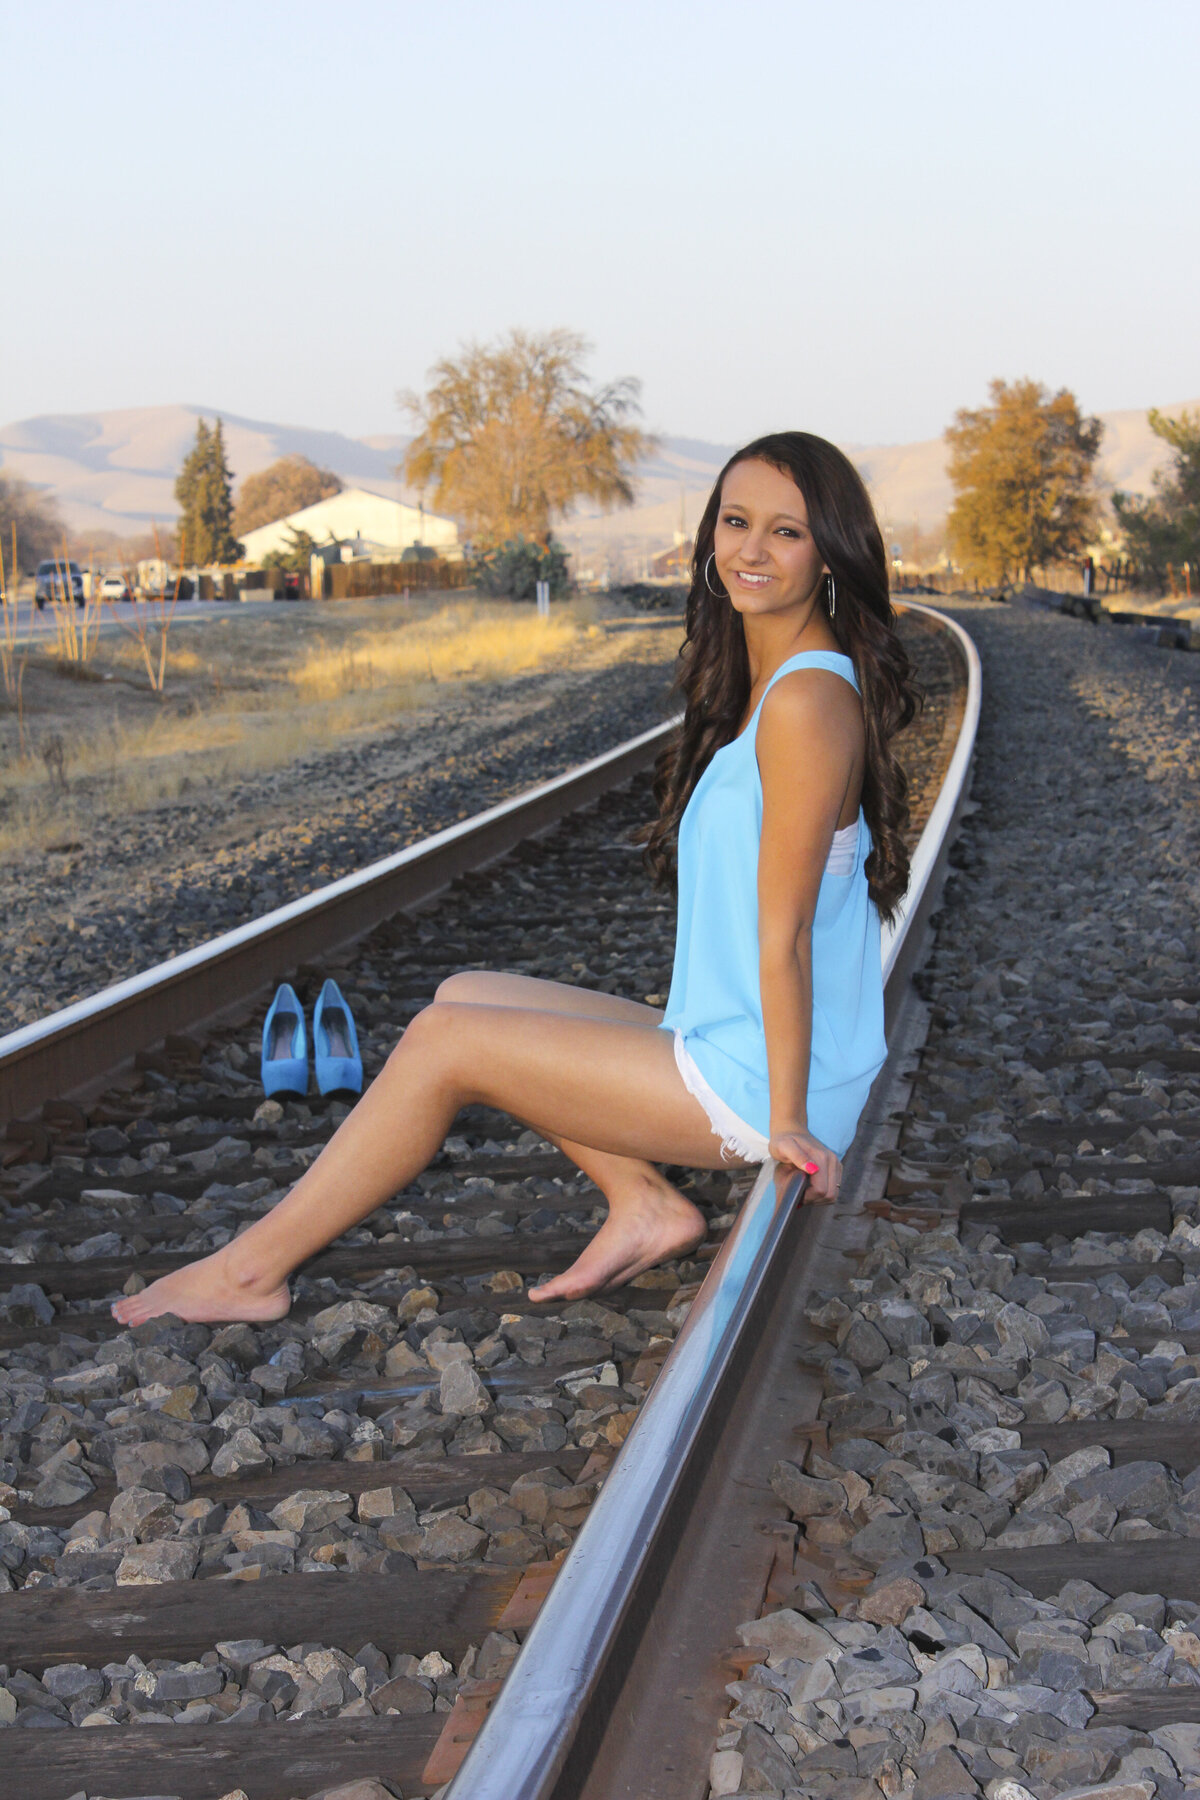 Lady sitting on Railroad tracks  with golden light of sunset beaming down with blue high heal shoes in background